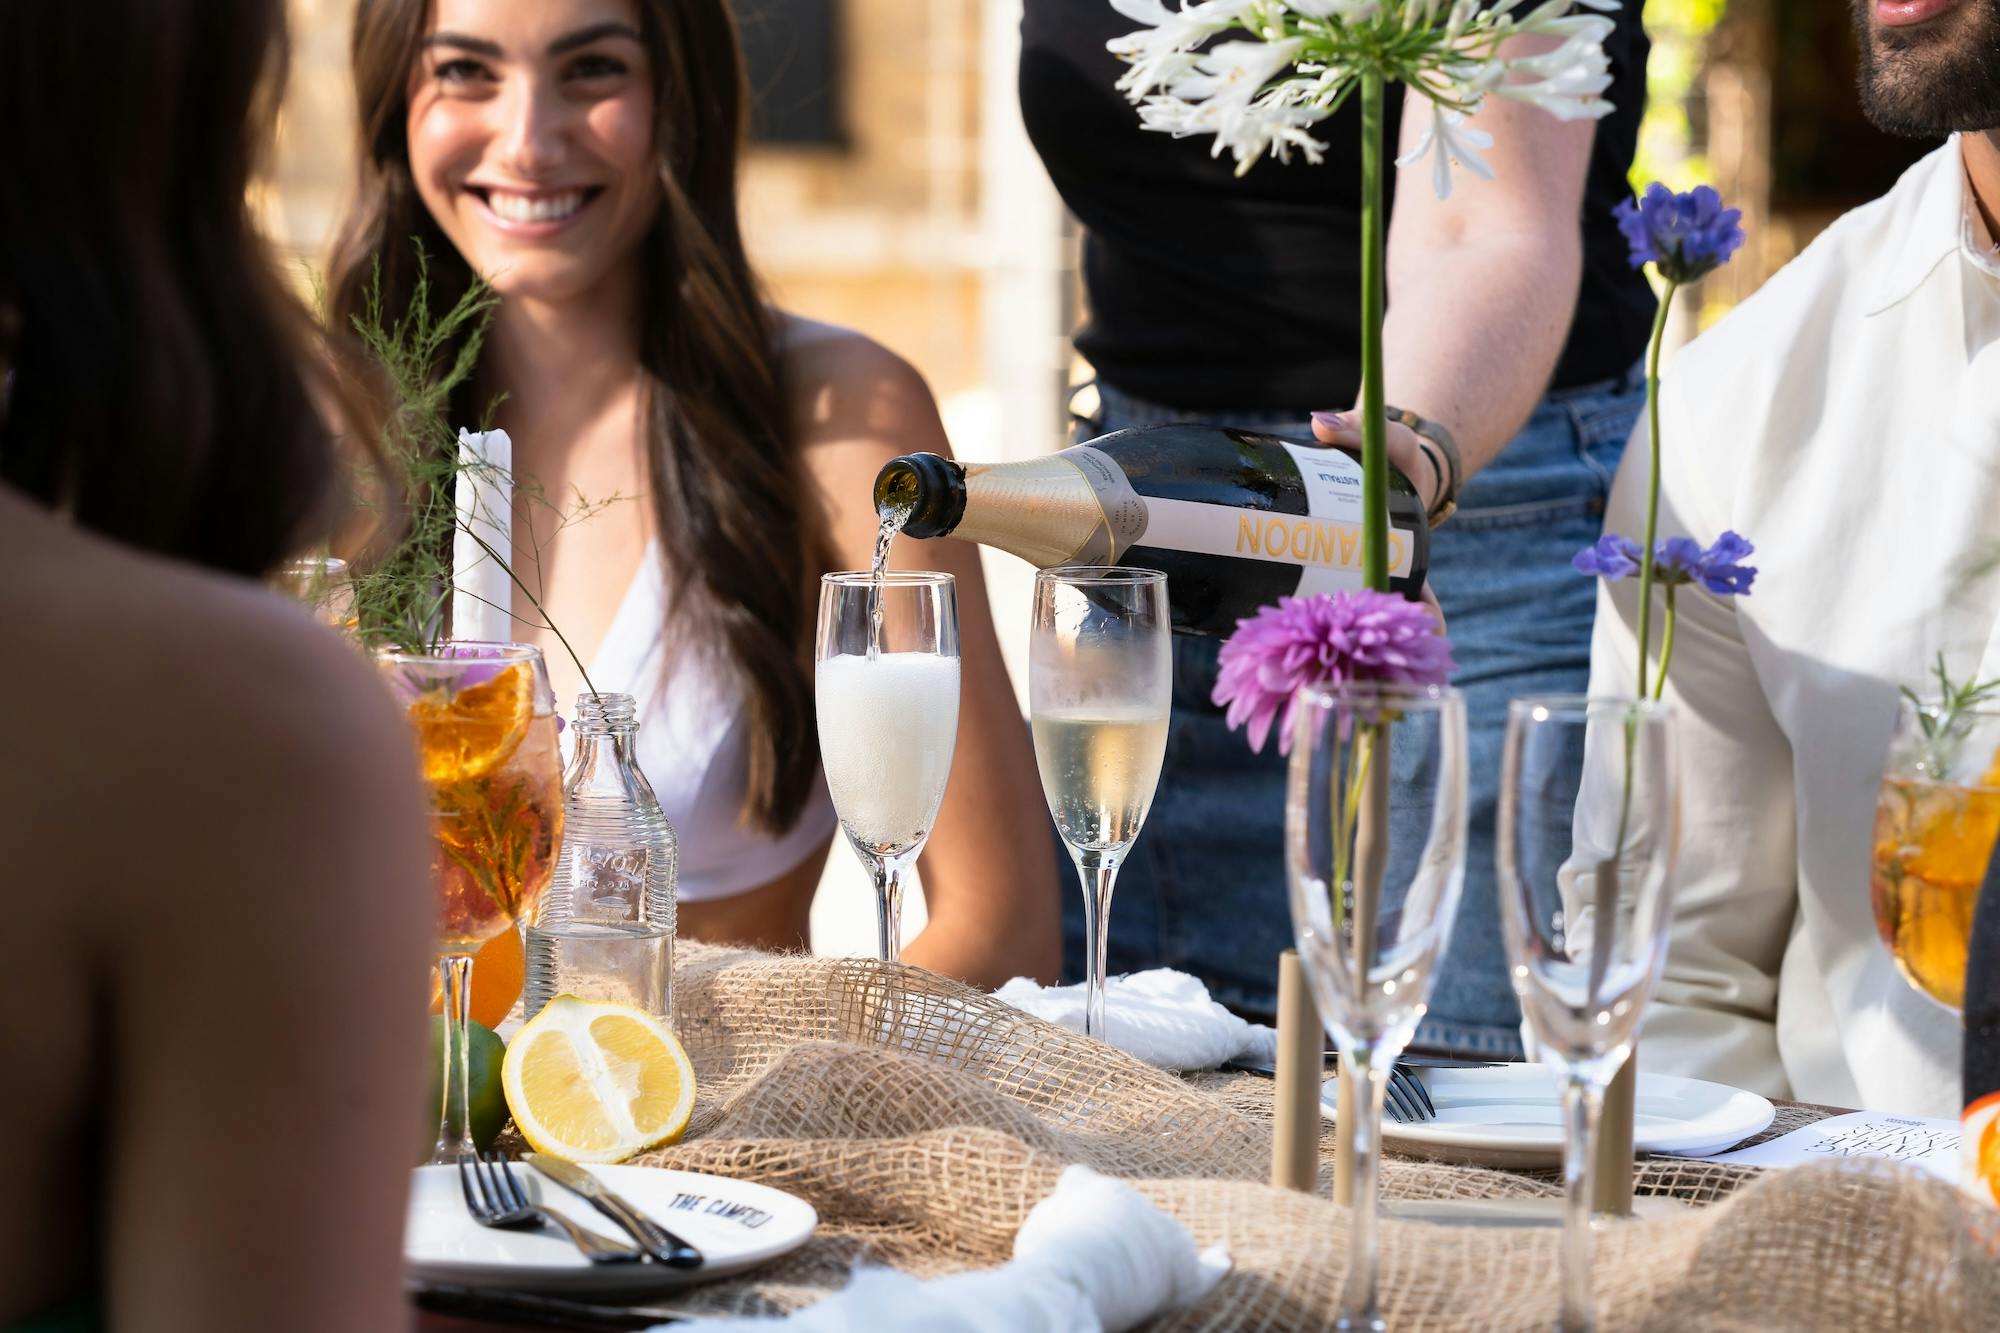 Chandon Australia have joined forces with the nation’s biggest pub, The Camfield, for a stunning night of sparkling under the stars.